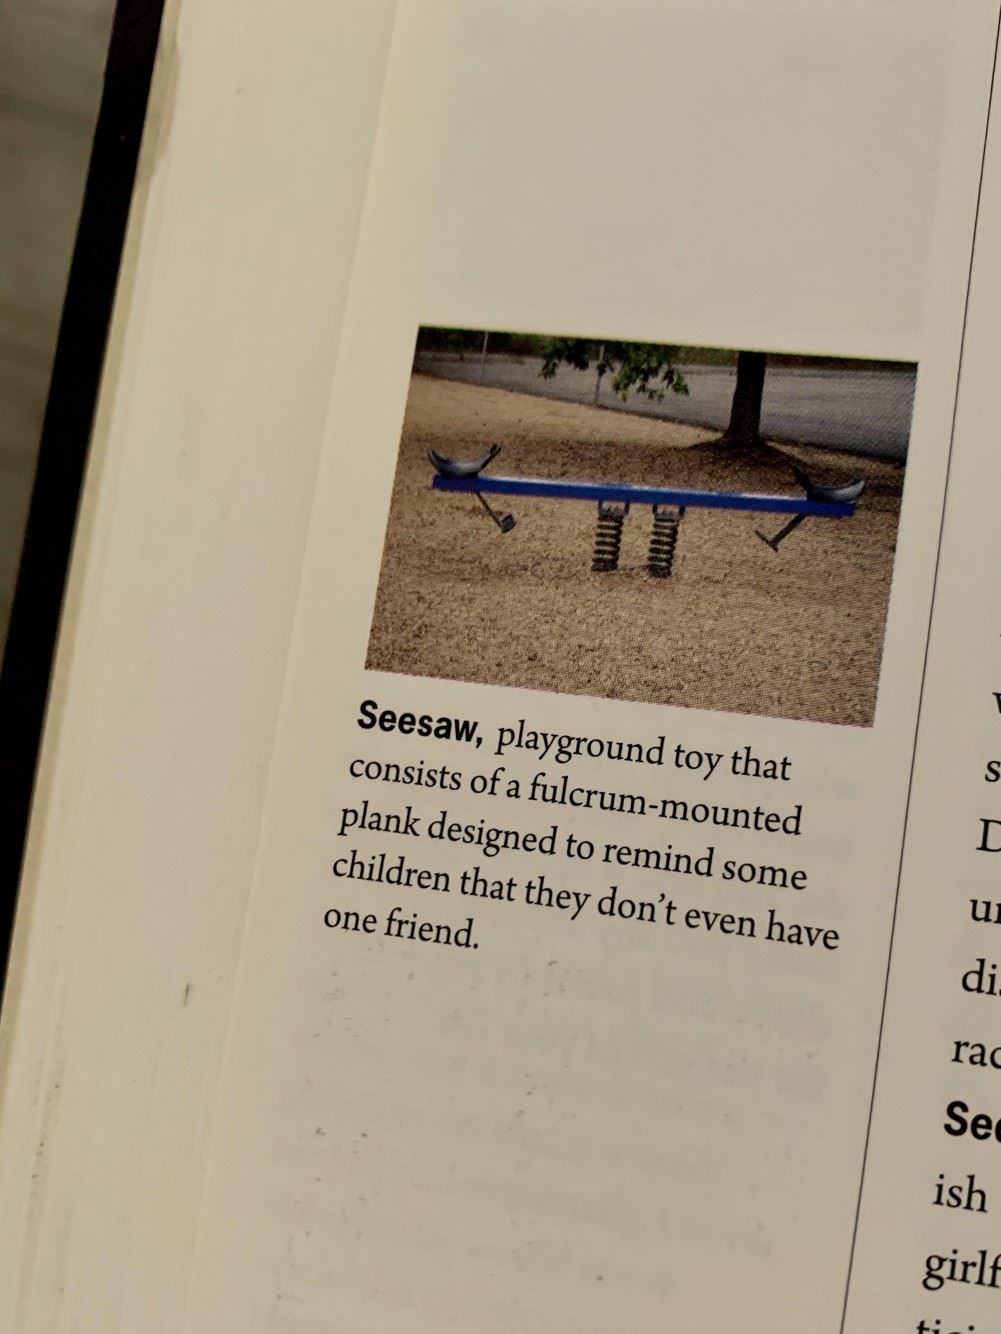 A Seesaw